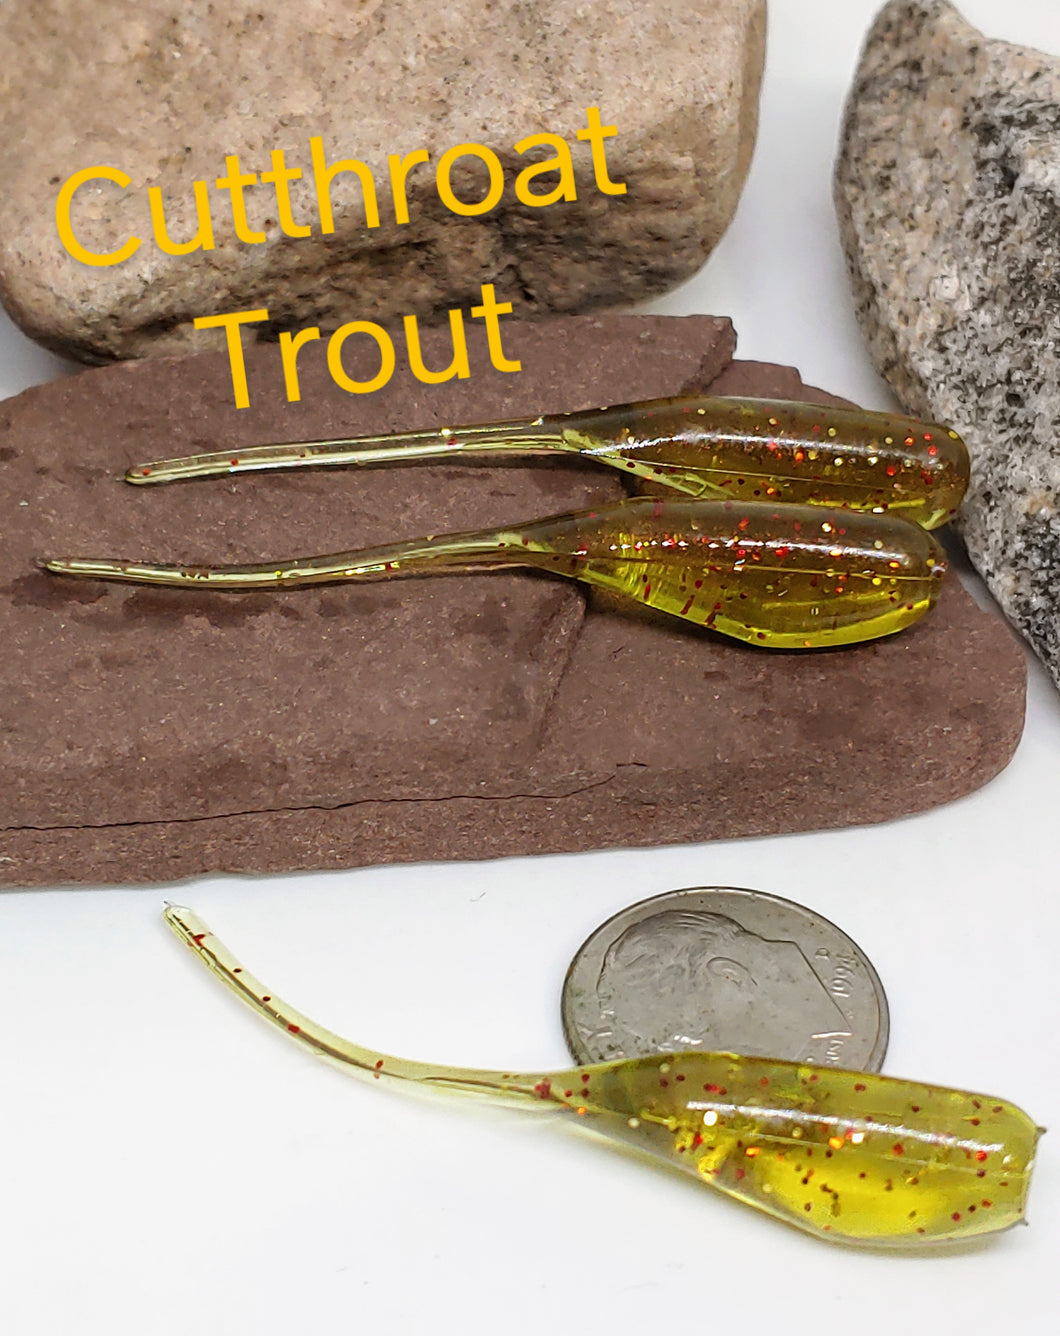 Tickle Tail Shad 2 - Cutthroat Trout 030 – J and S Soft Plastyx